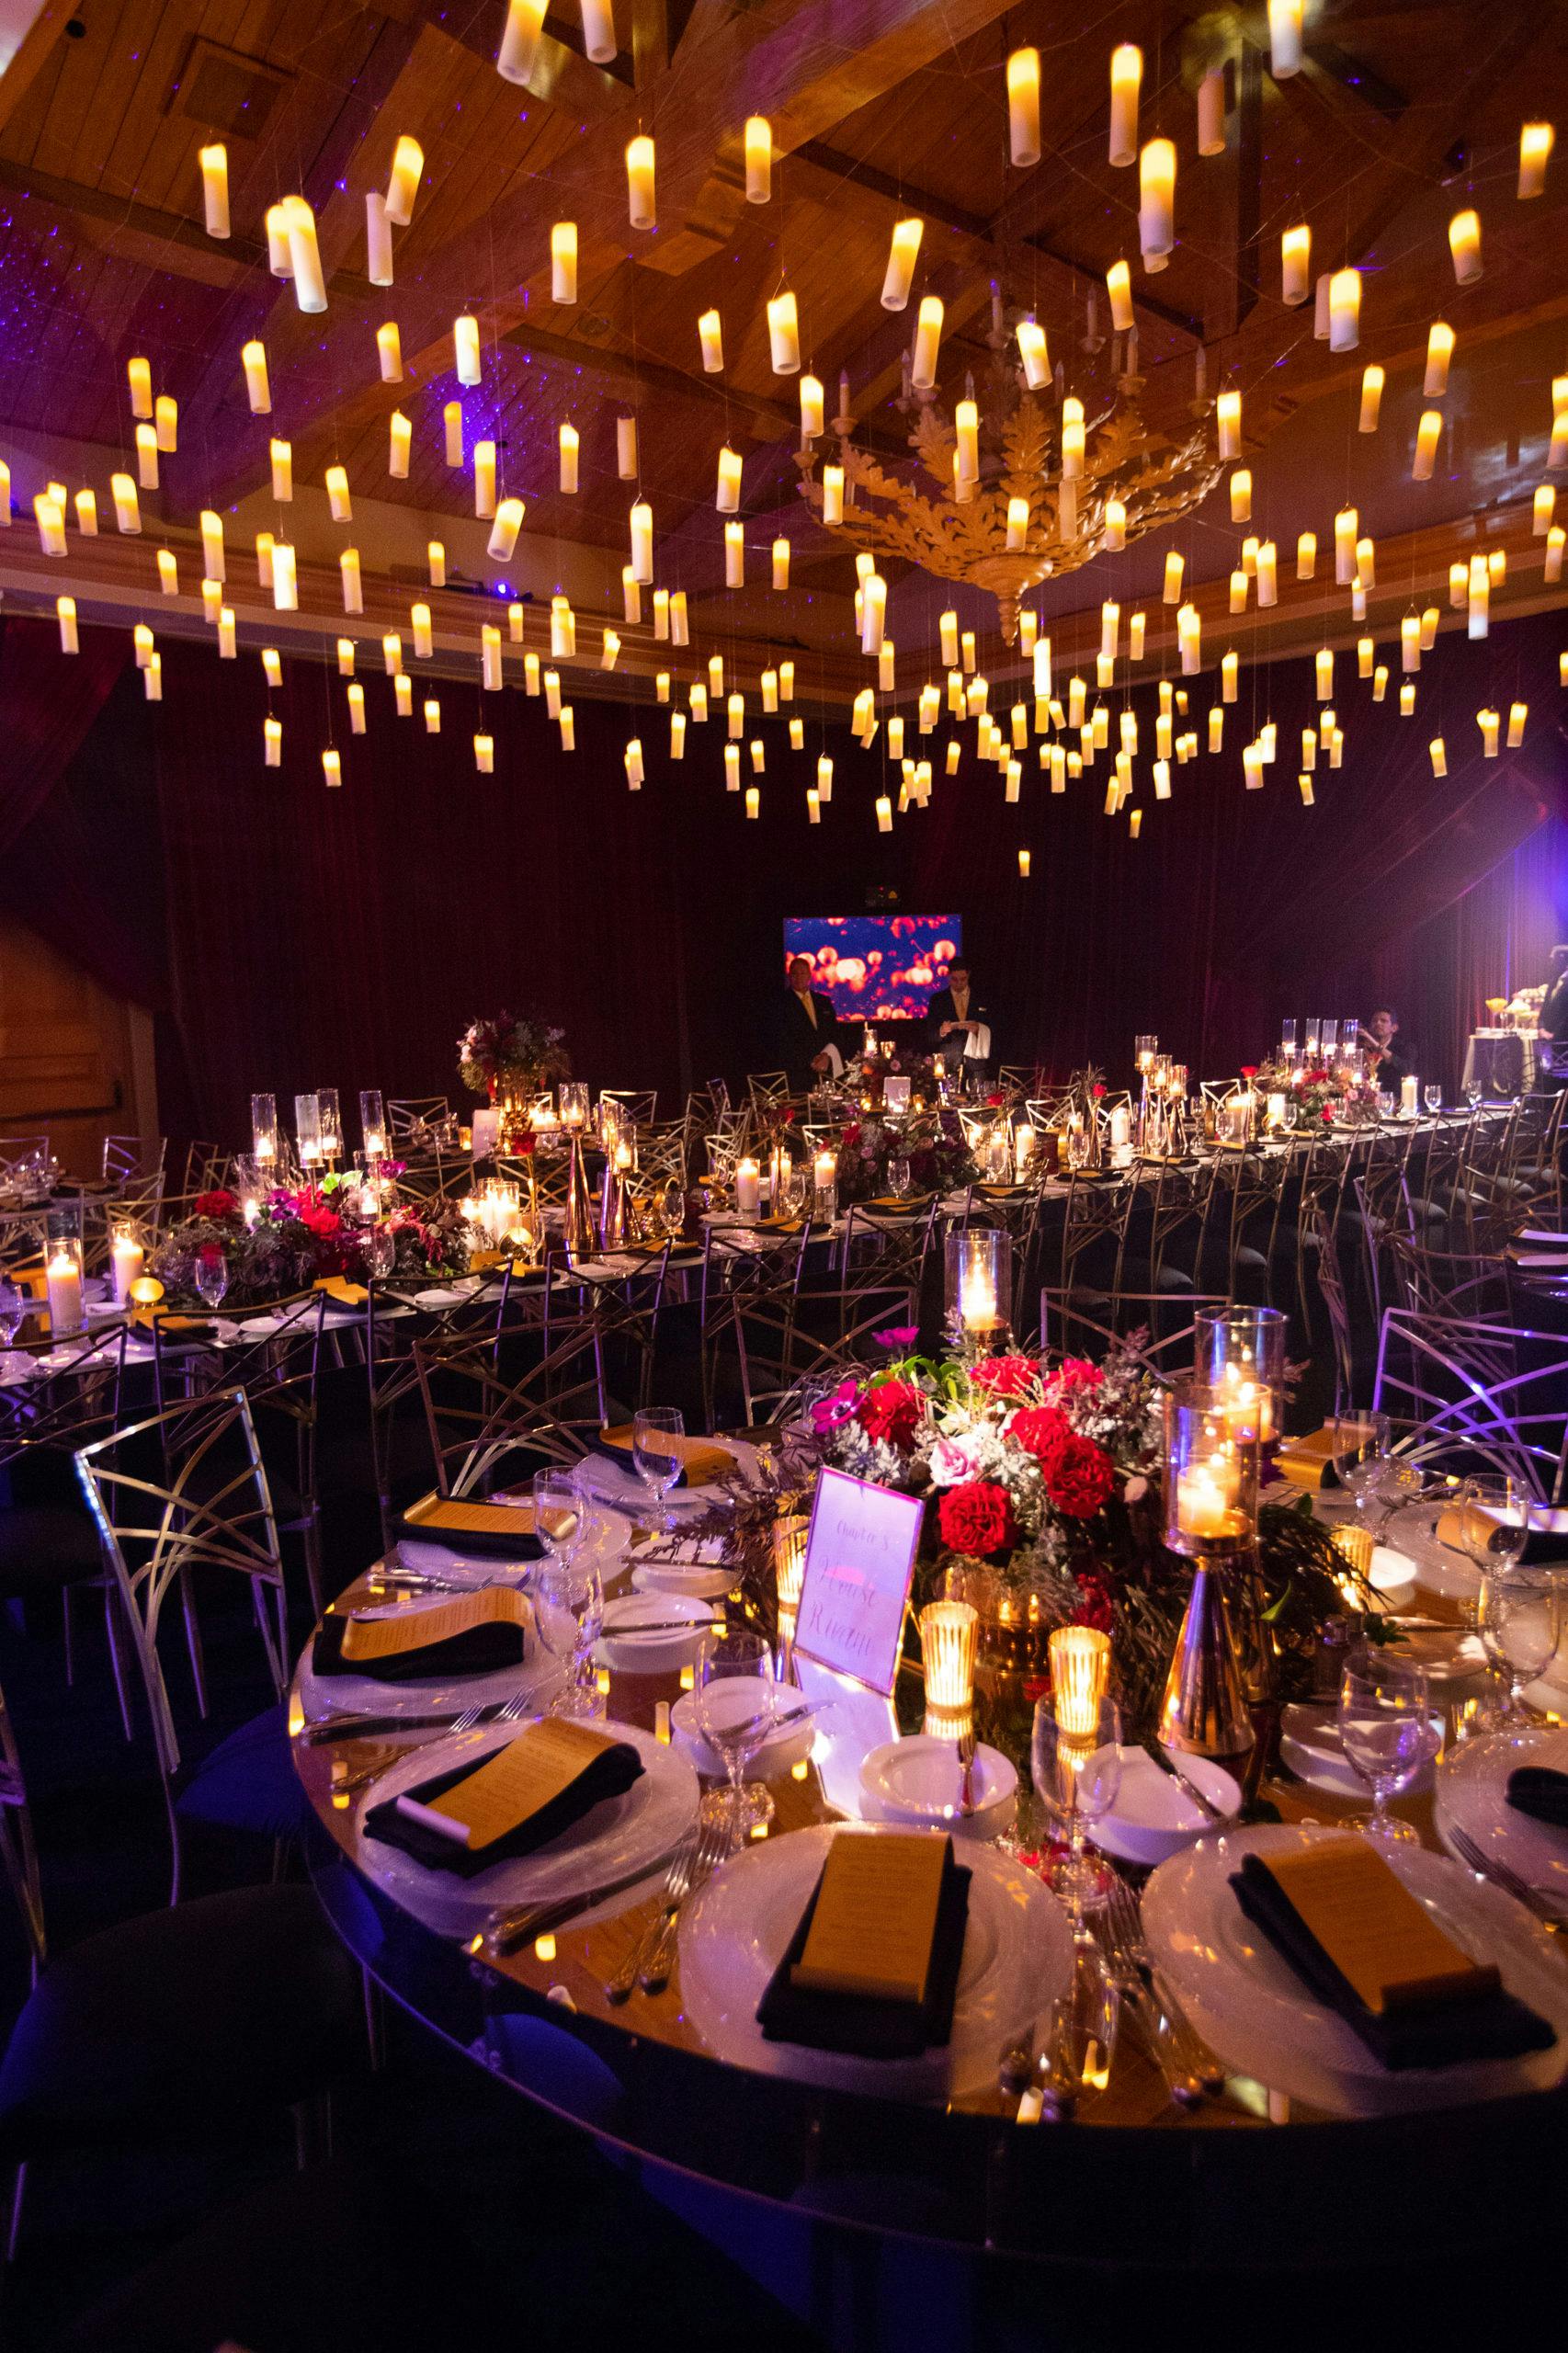 Glamorous wedding reception with suspended candle light from ceiling | PartySlate